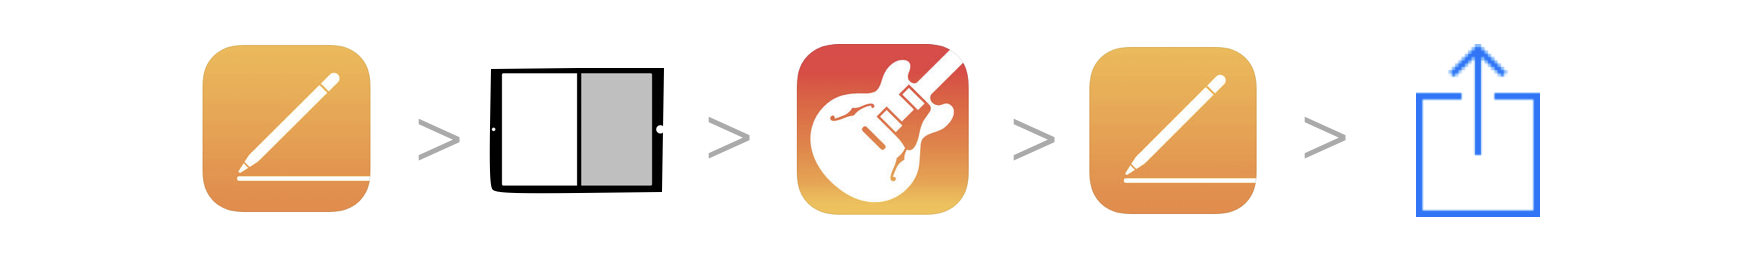 pages, split screen, garageband, pages, share arrow